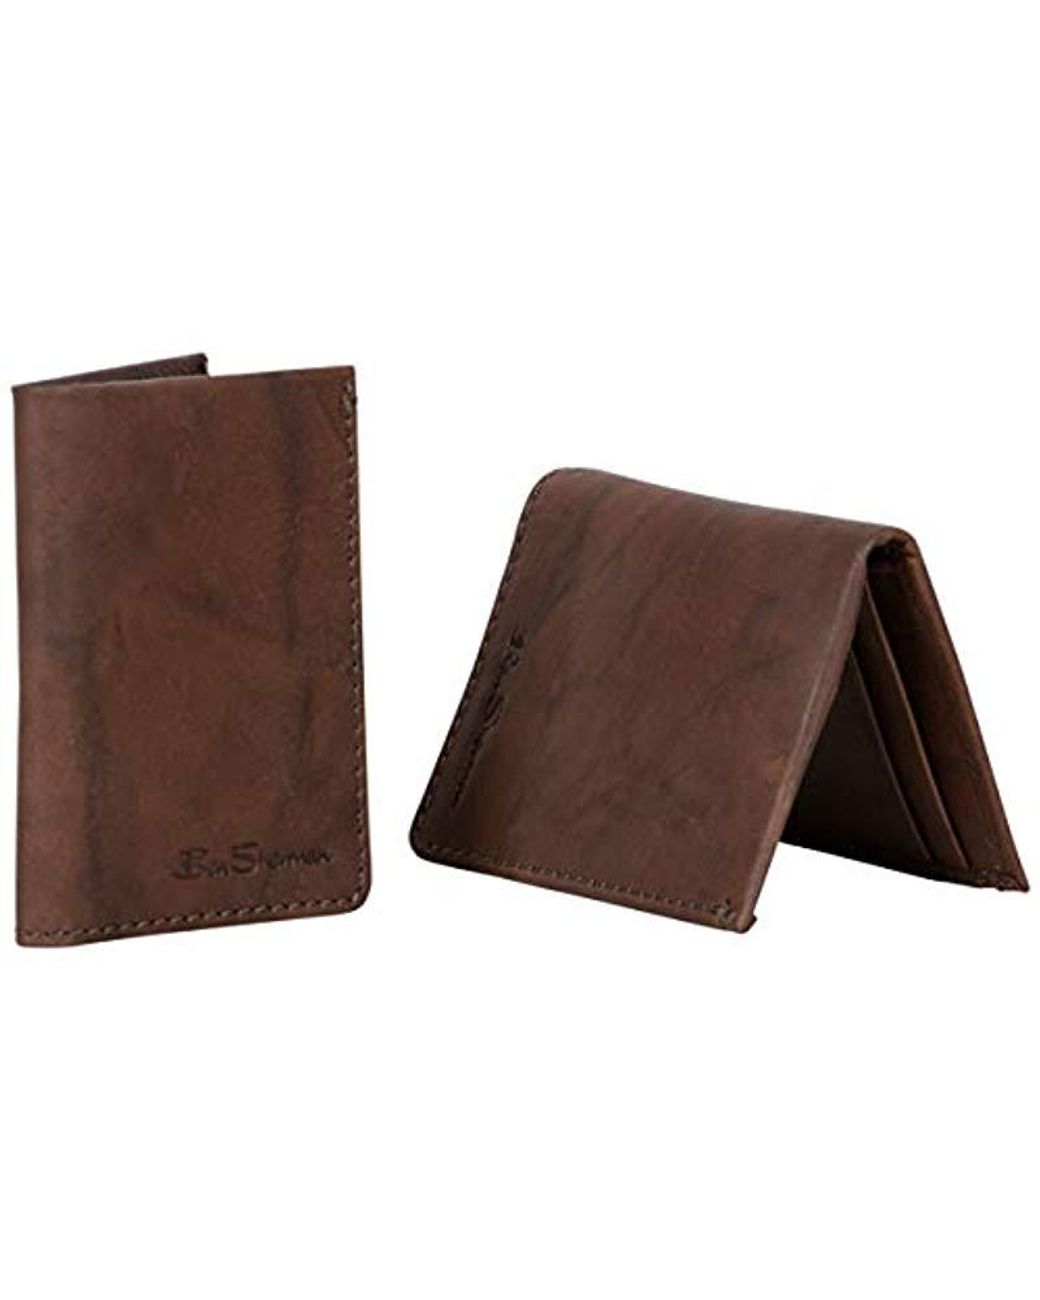 Ben Sherman Kensington Collection Genuine Leather Anti-Theft RFID Wallet  Clothing, Shoes & Jewelry Contemporary & Designer